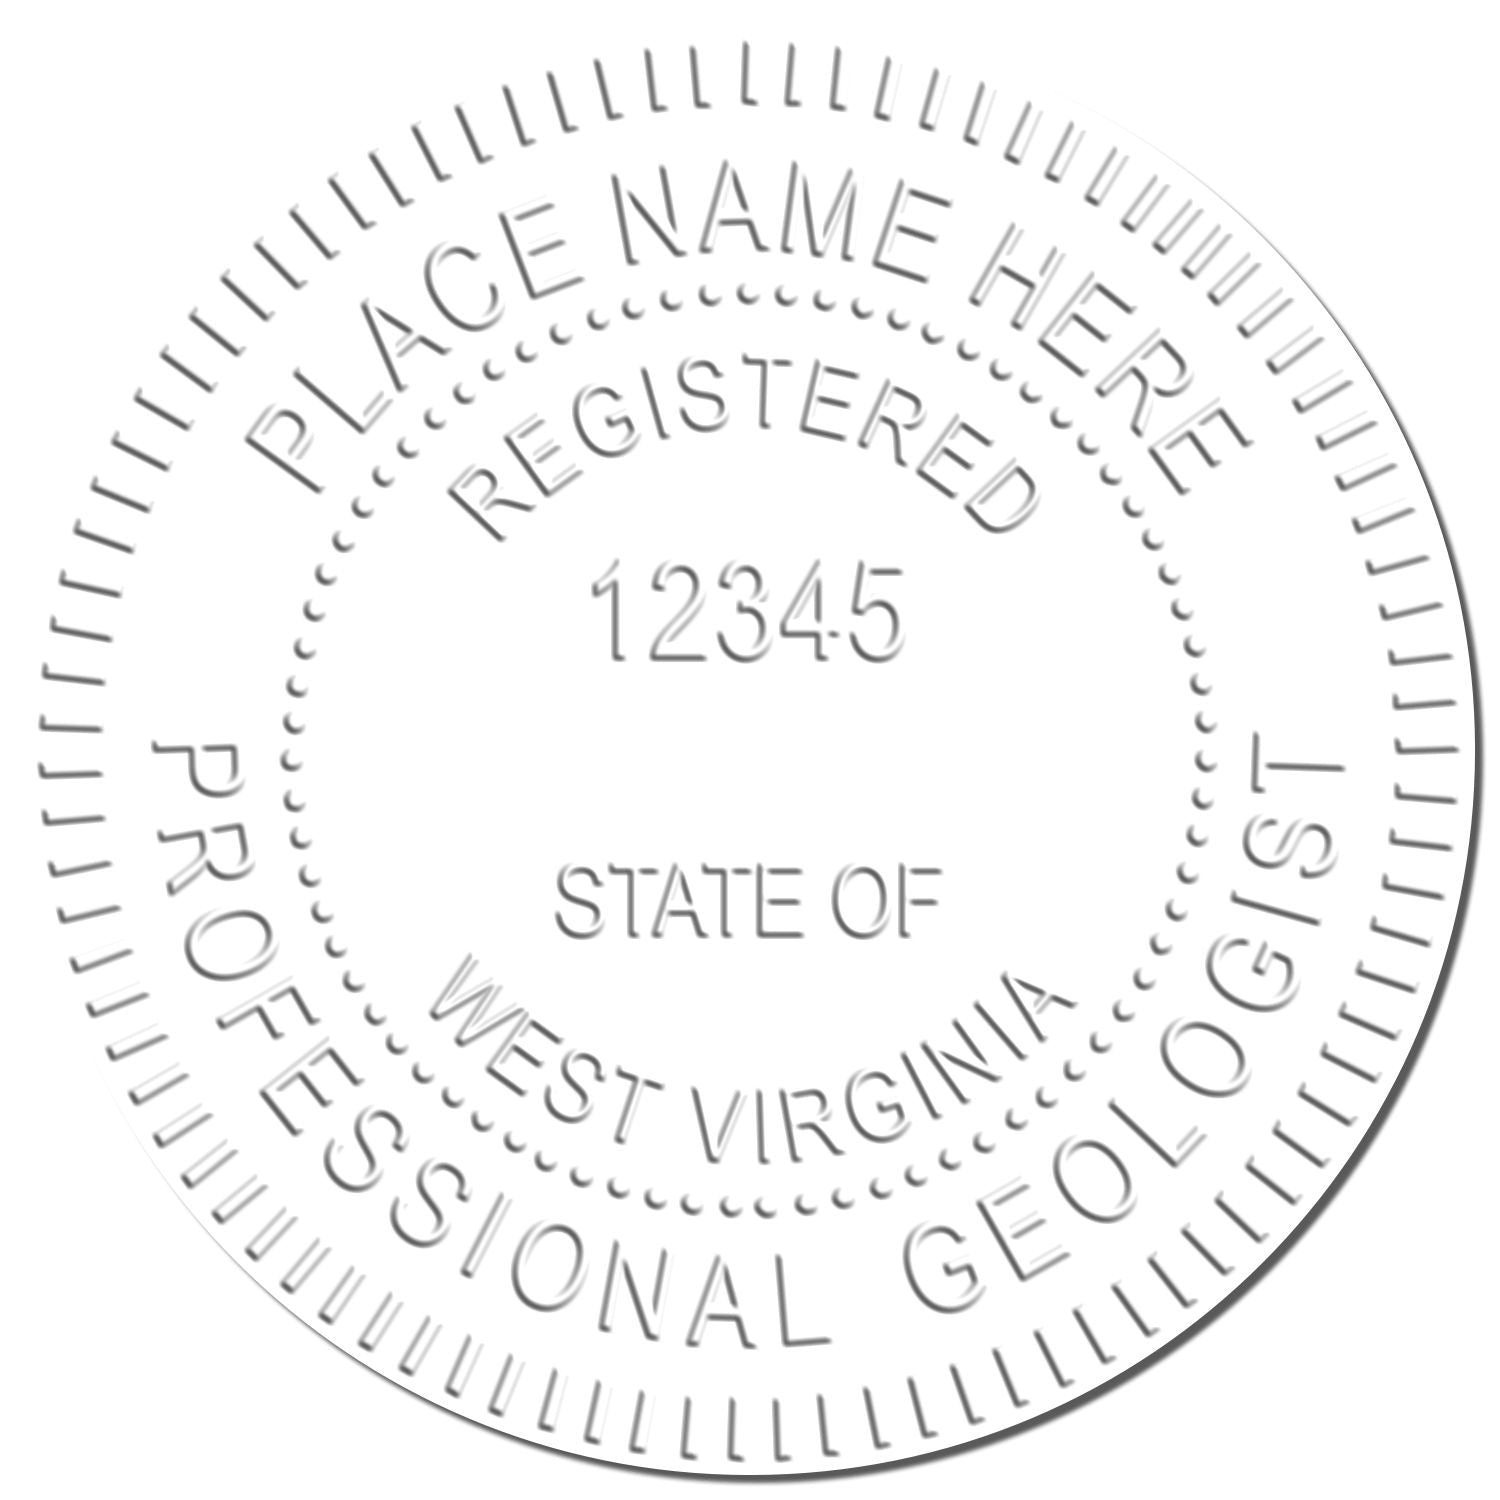 The main image for the West Virginia Geologist Desk Seal depicting a sample of the imprint and imprint sample